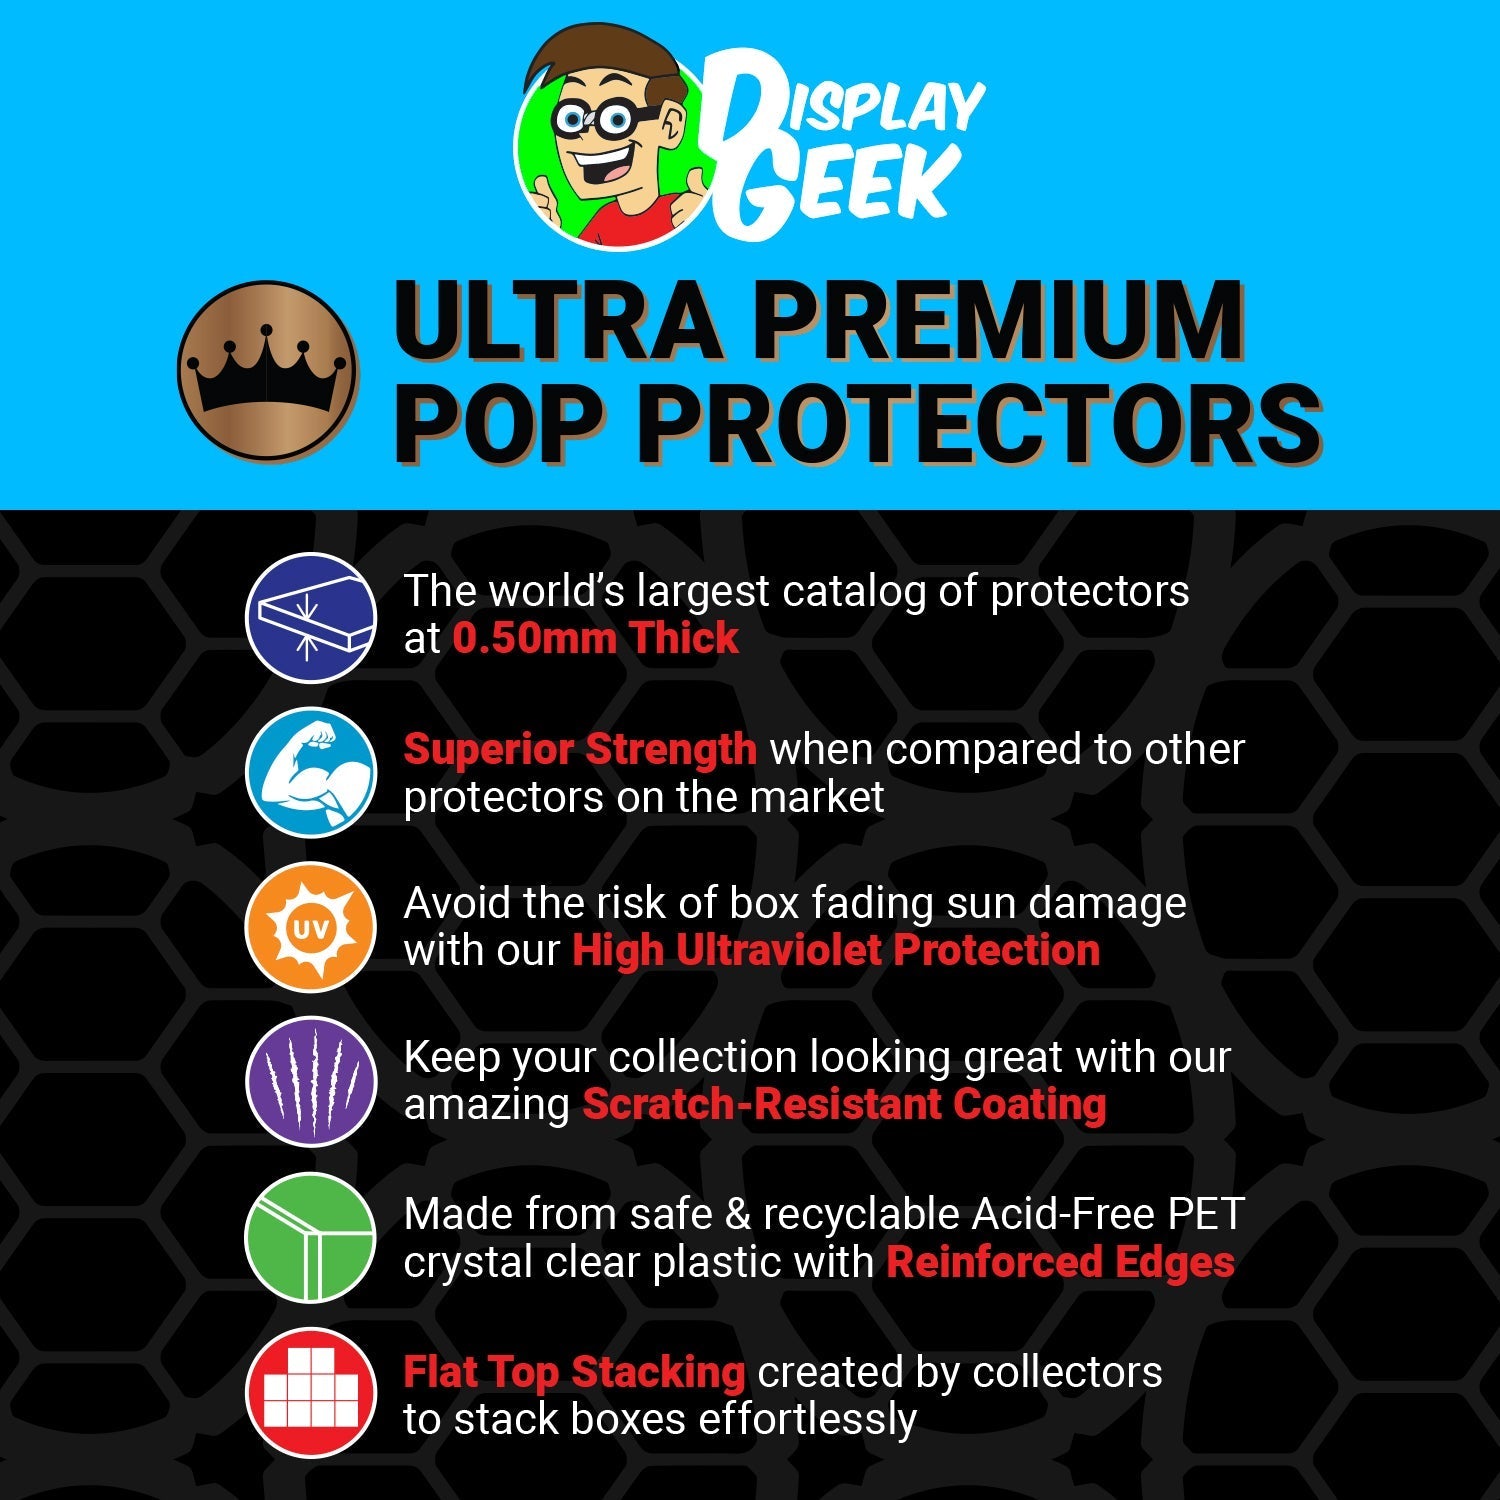 Pop Protector for Carl and Ellie Holding Hands #1338 Funko Pop Moment - PPG Pop Protector Guide Search Created by Display Geek